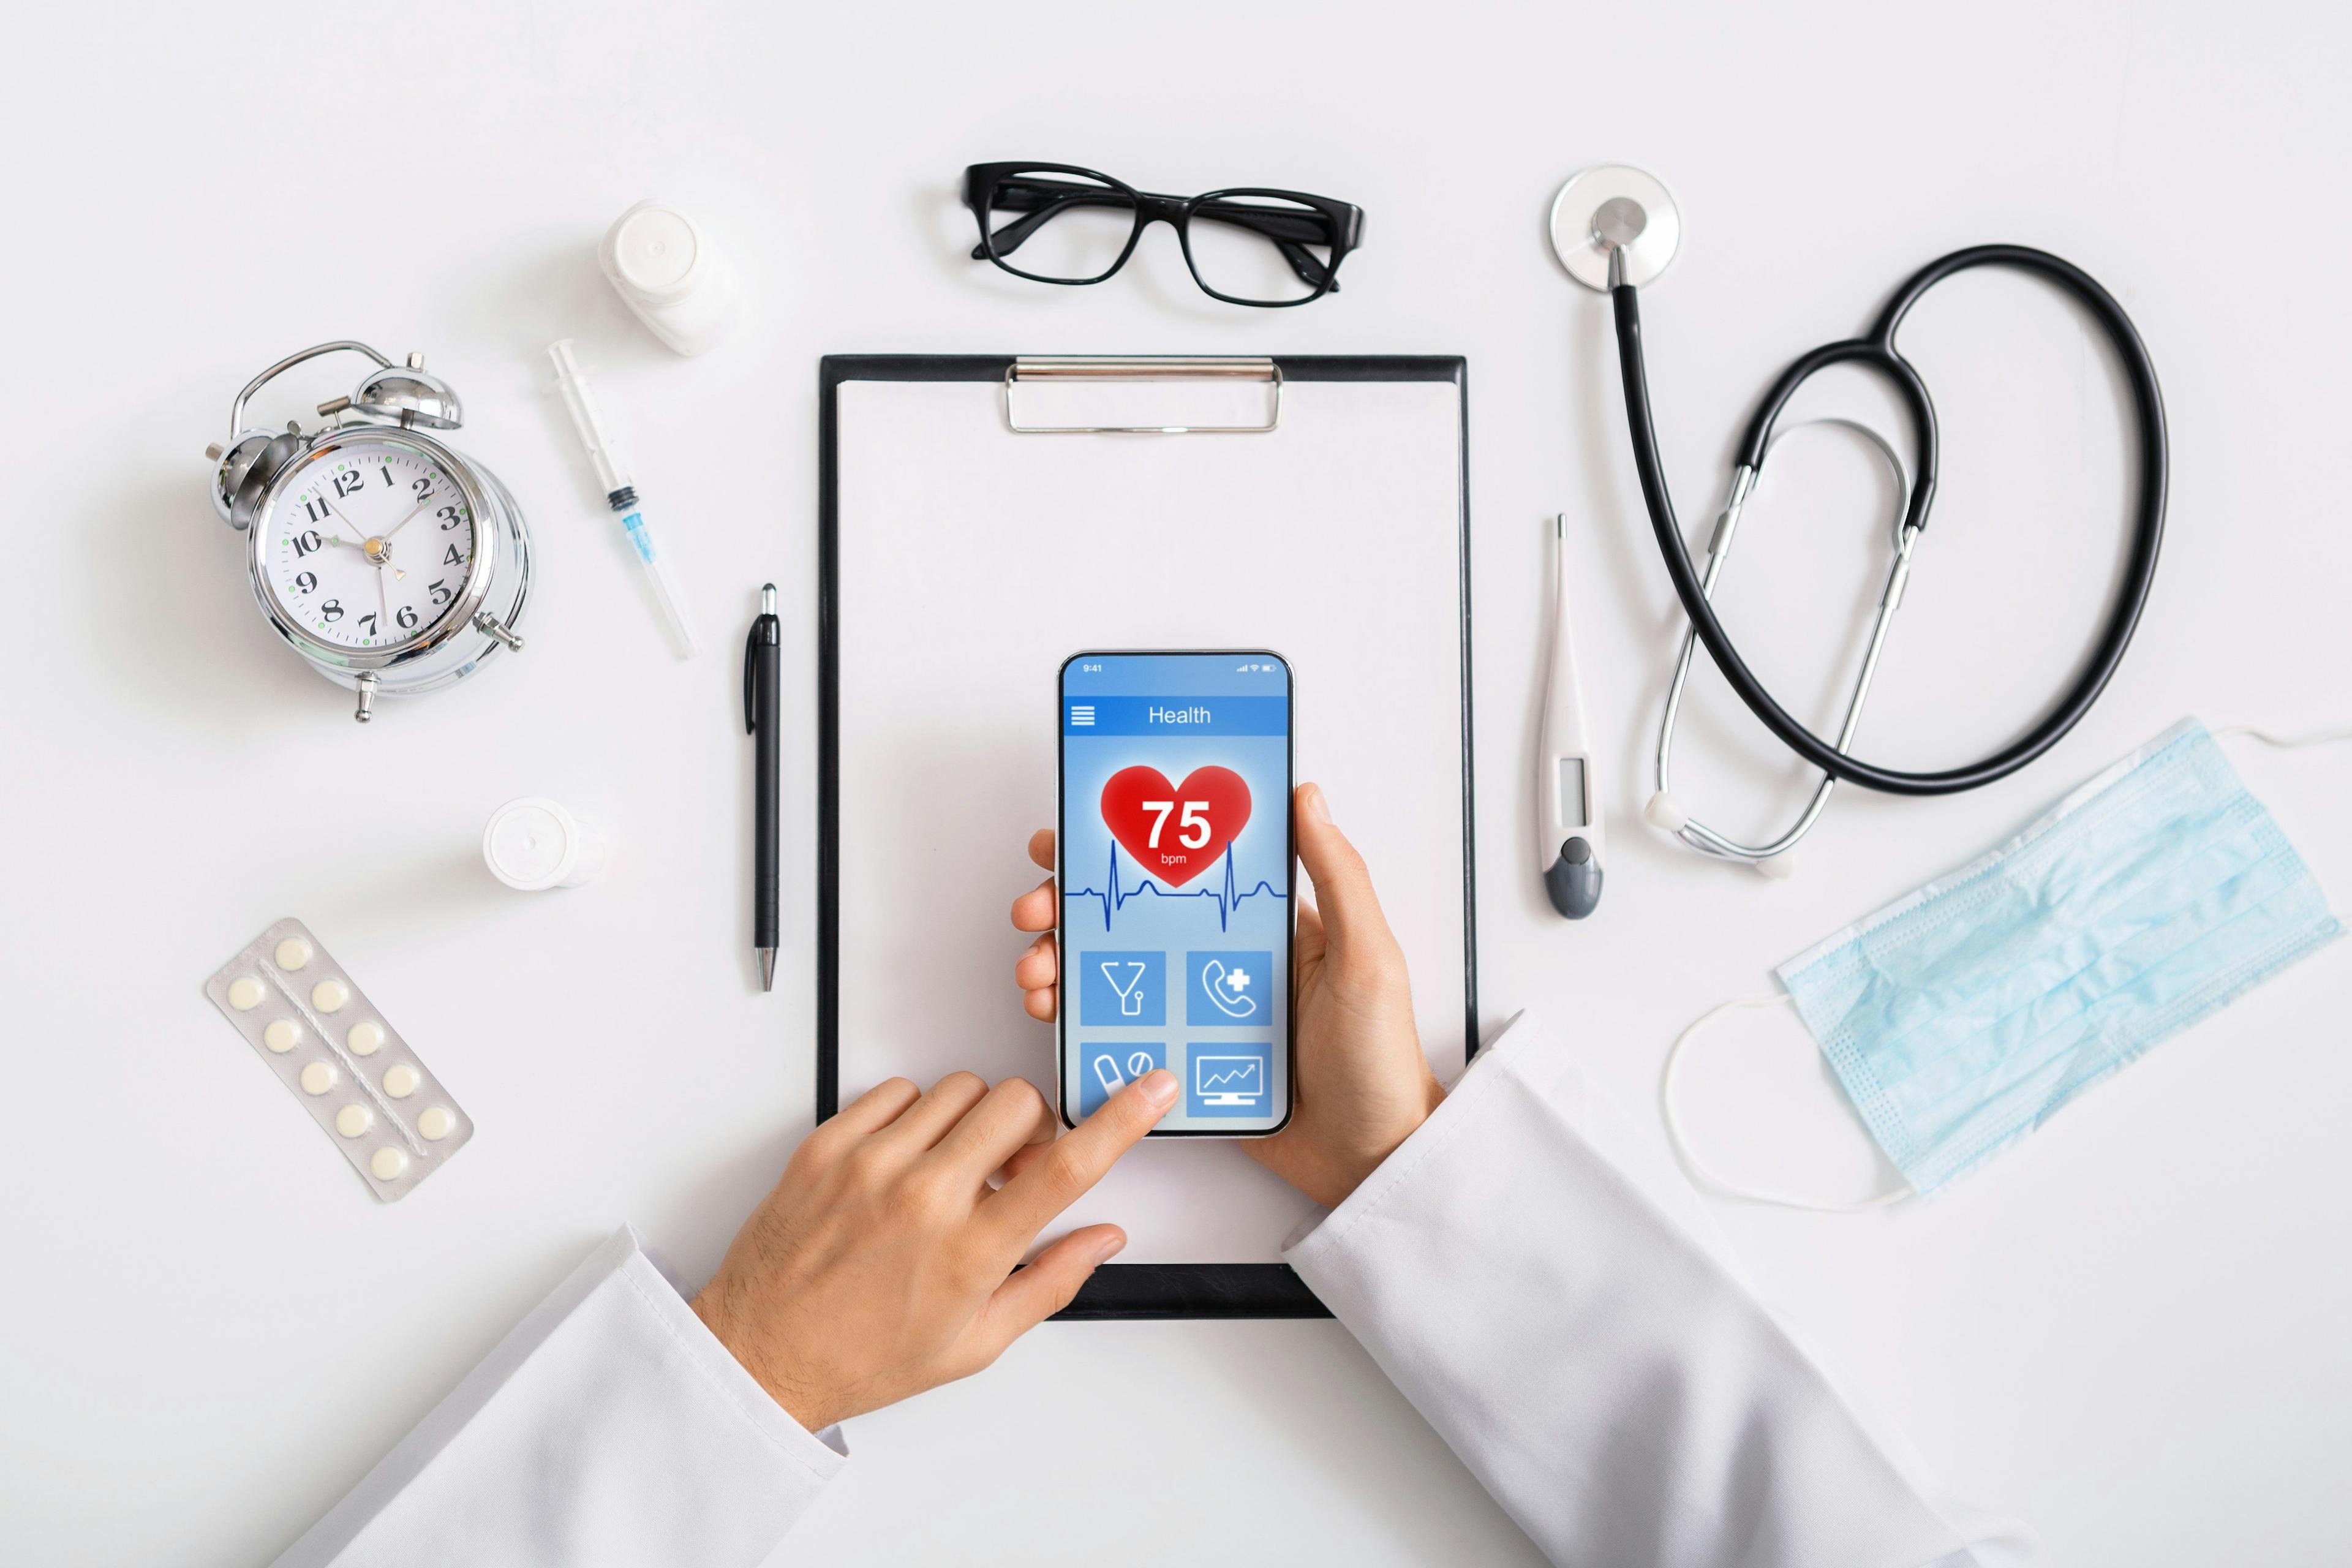 Text connections for telehealth eliminate virtual waiting rooms for physicians, patients